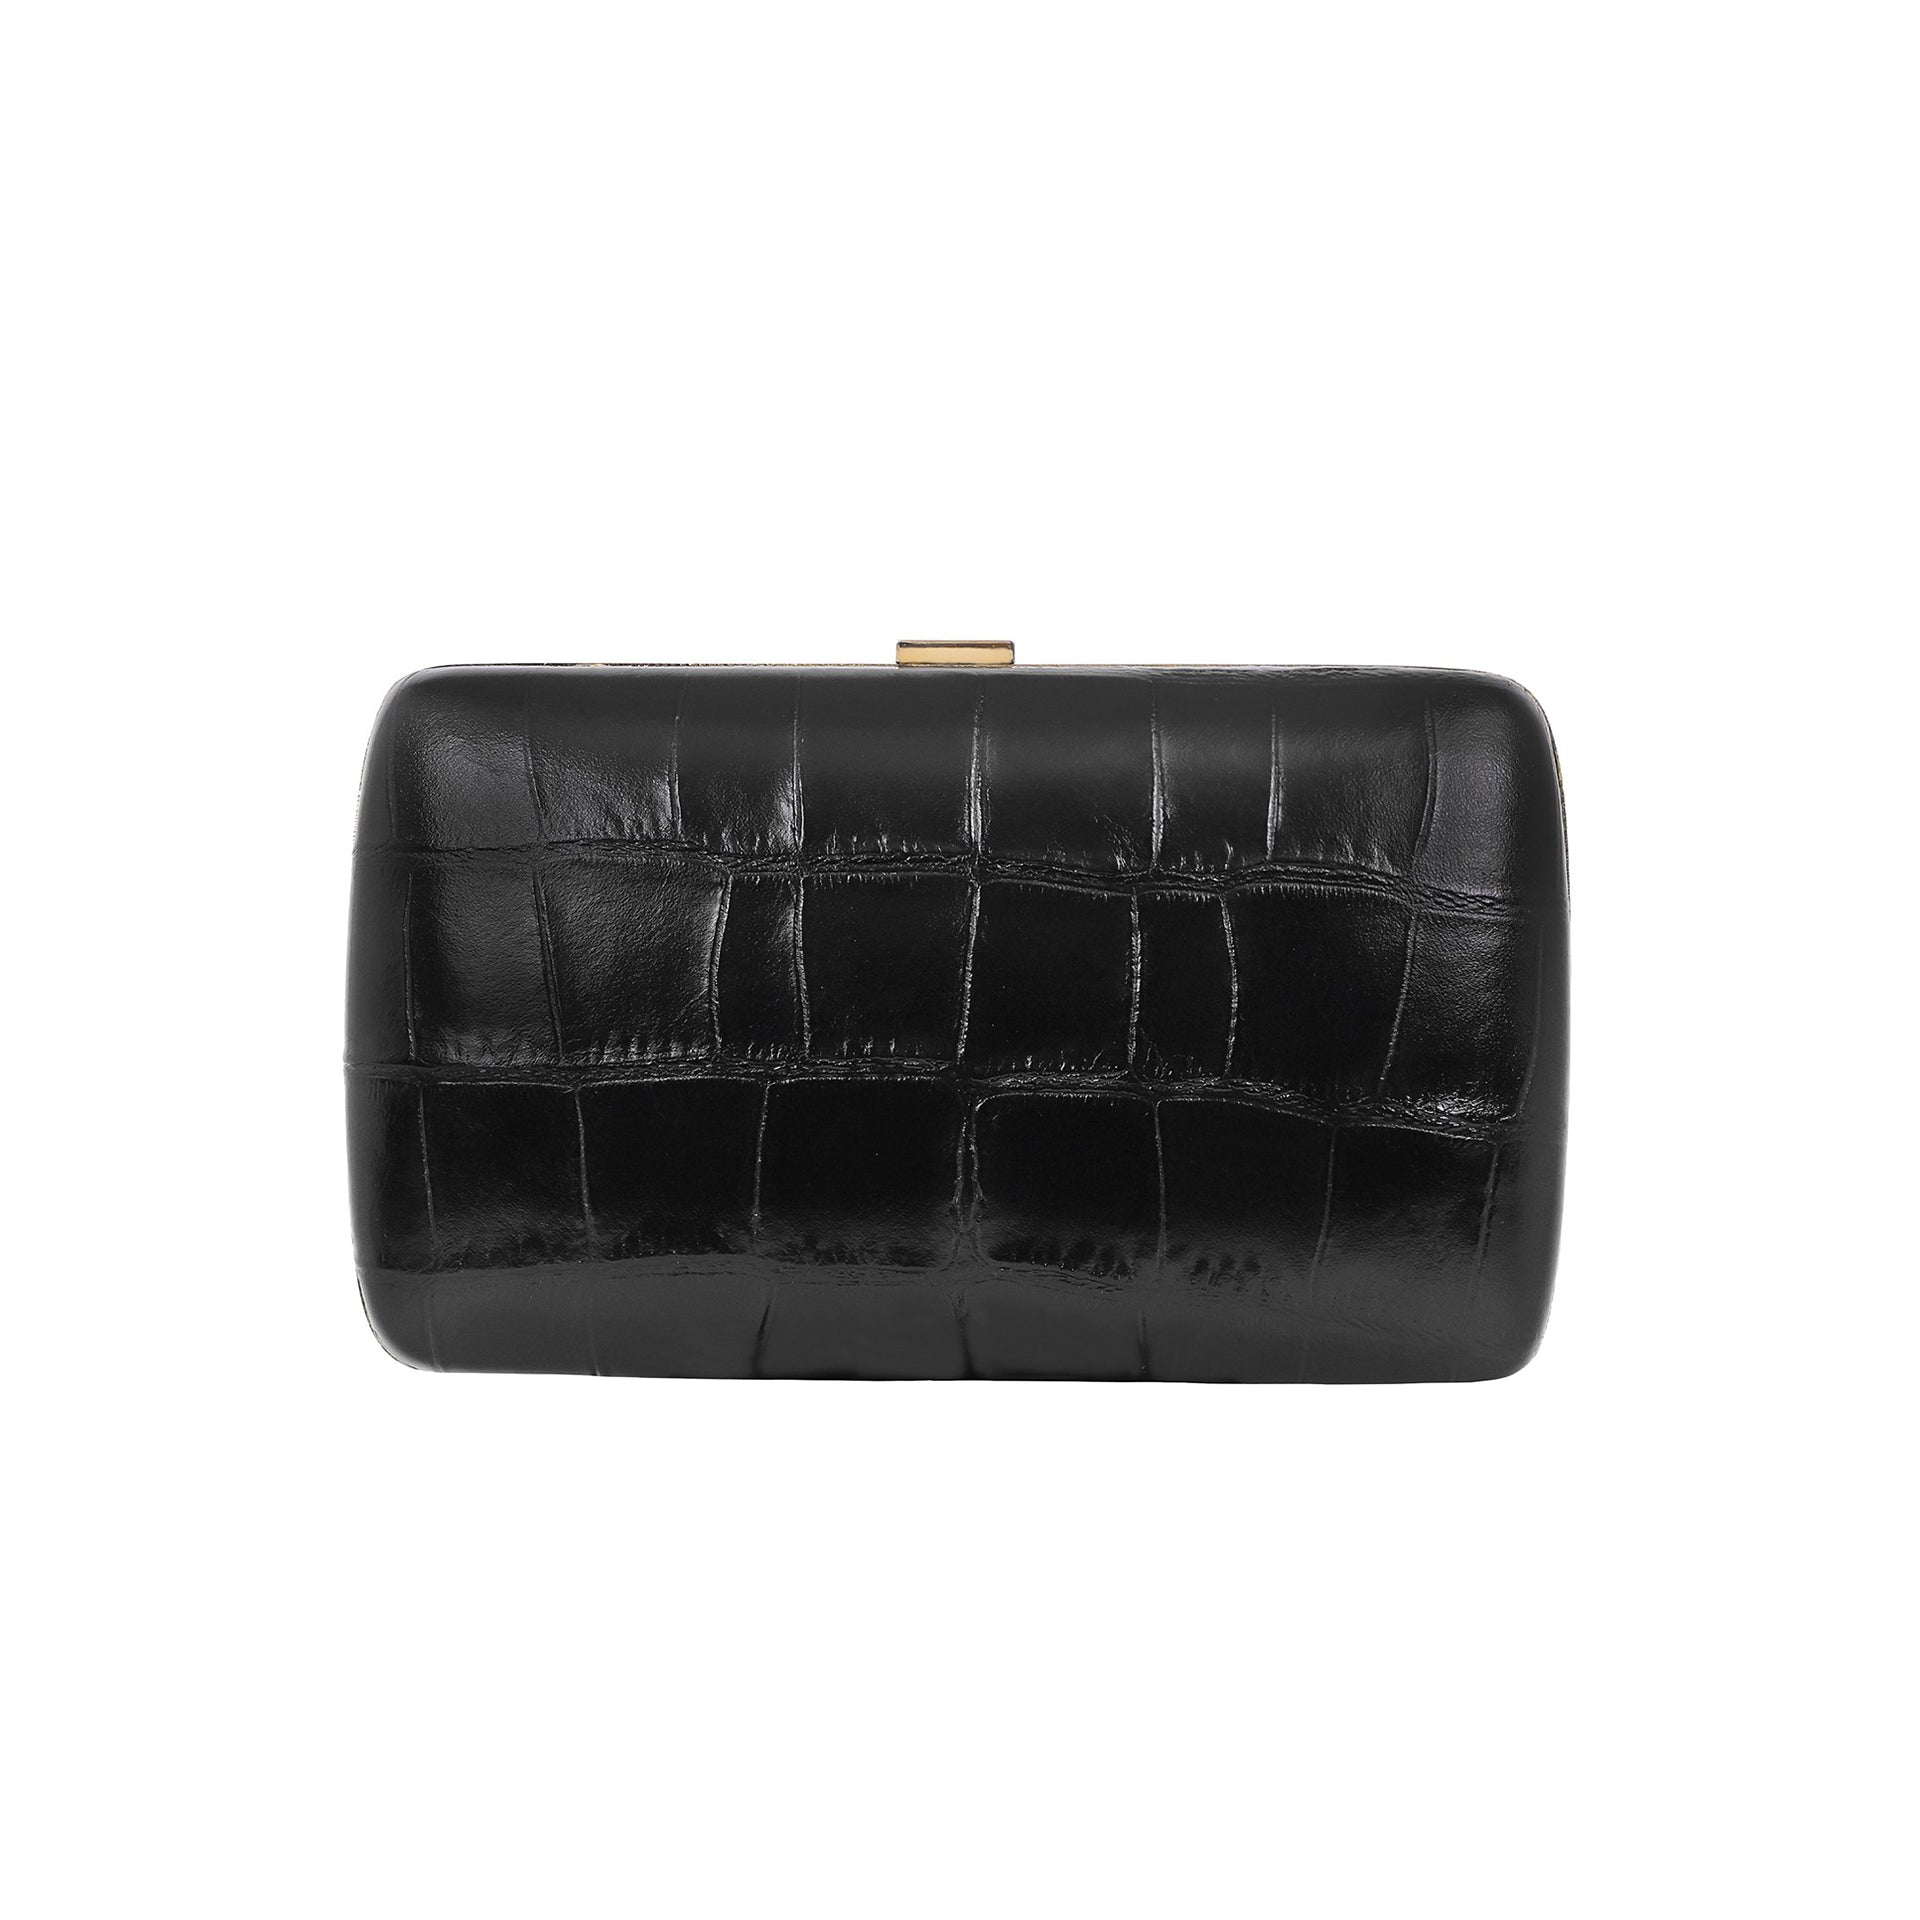 Handmade Italian Embossed-Croc Clutch, Leather, Gold Strap, Made in ...